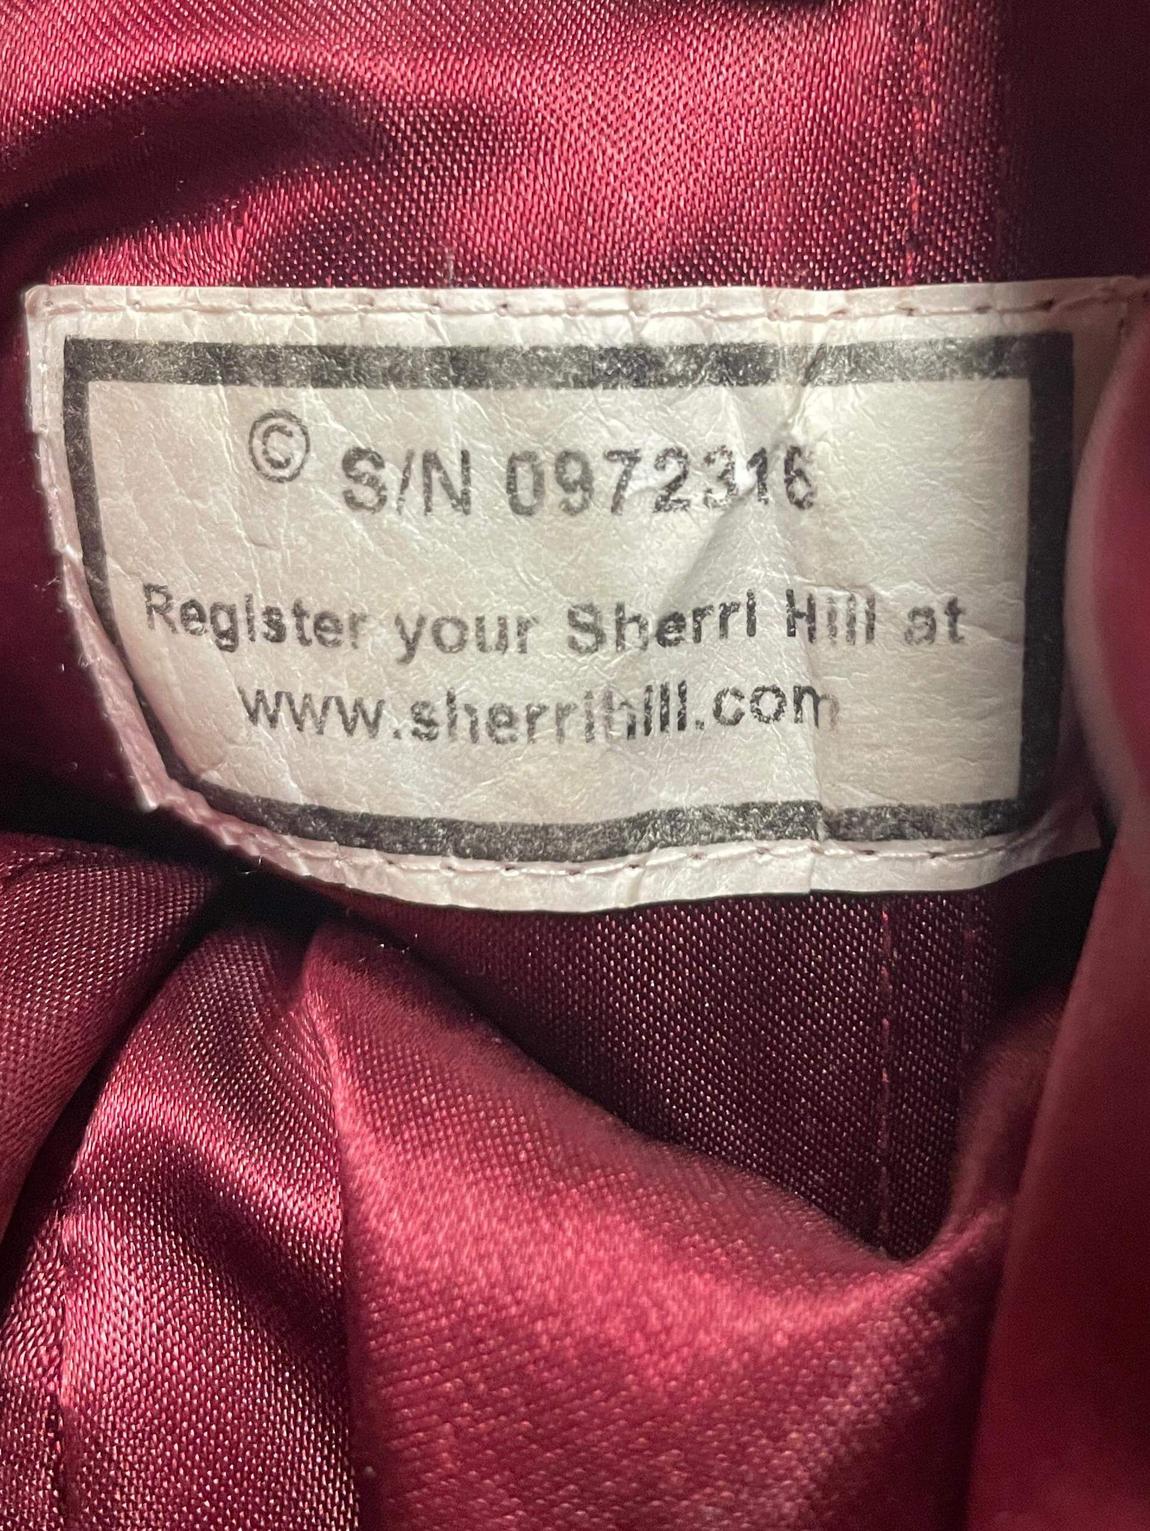 Sherri Hill Size 6 Bridesmaid Strapless Satin Burgundy Red A-line Dress on Queenly